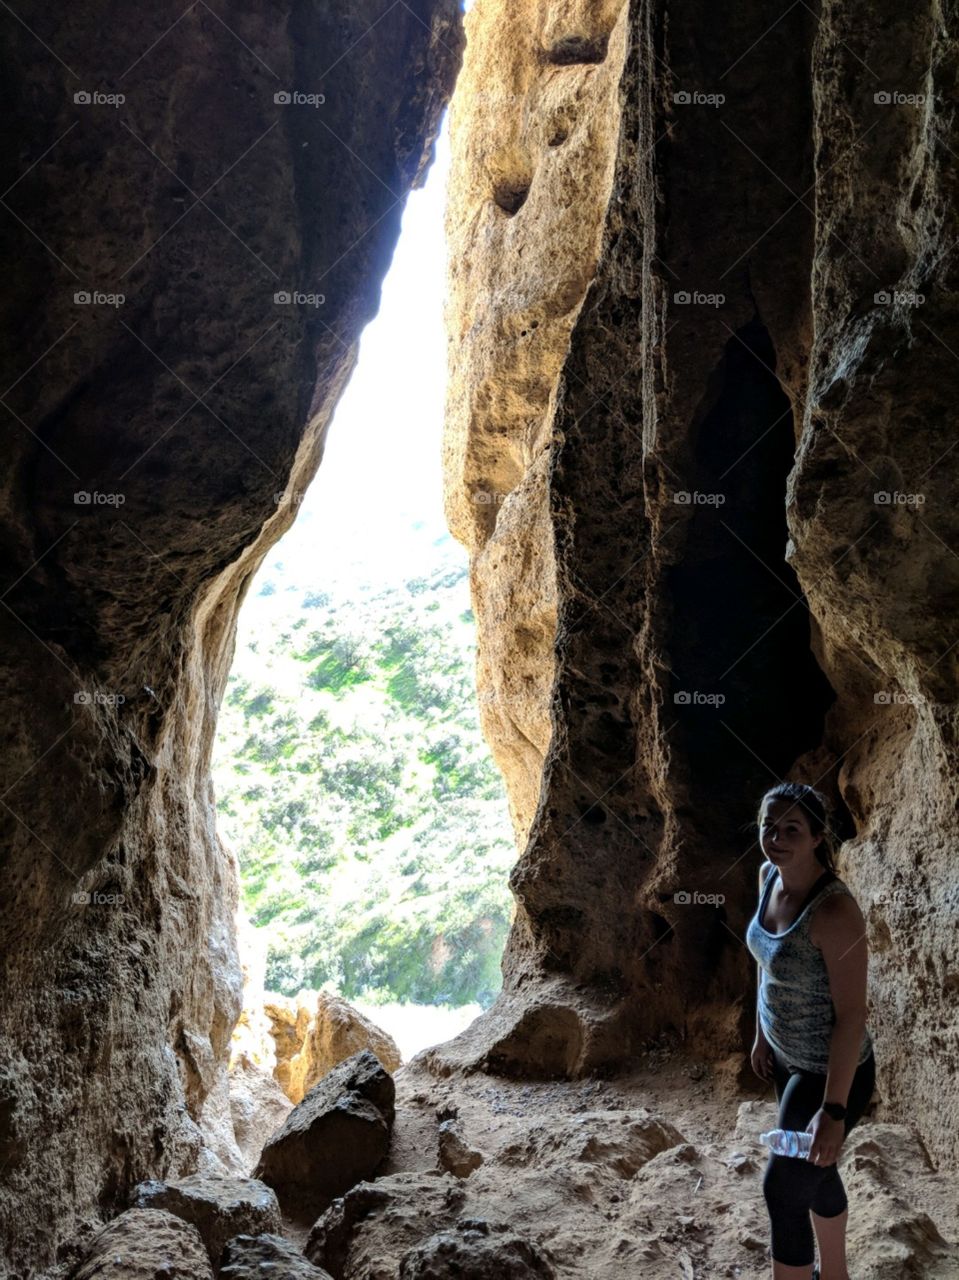 hiked into a cave